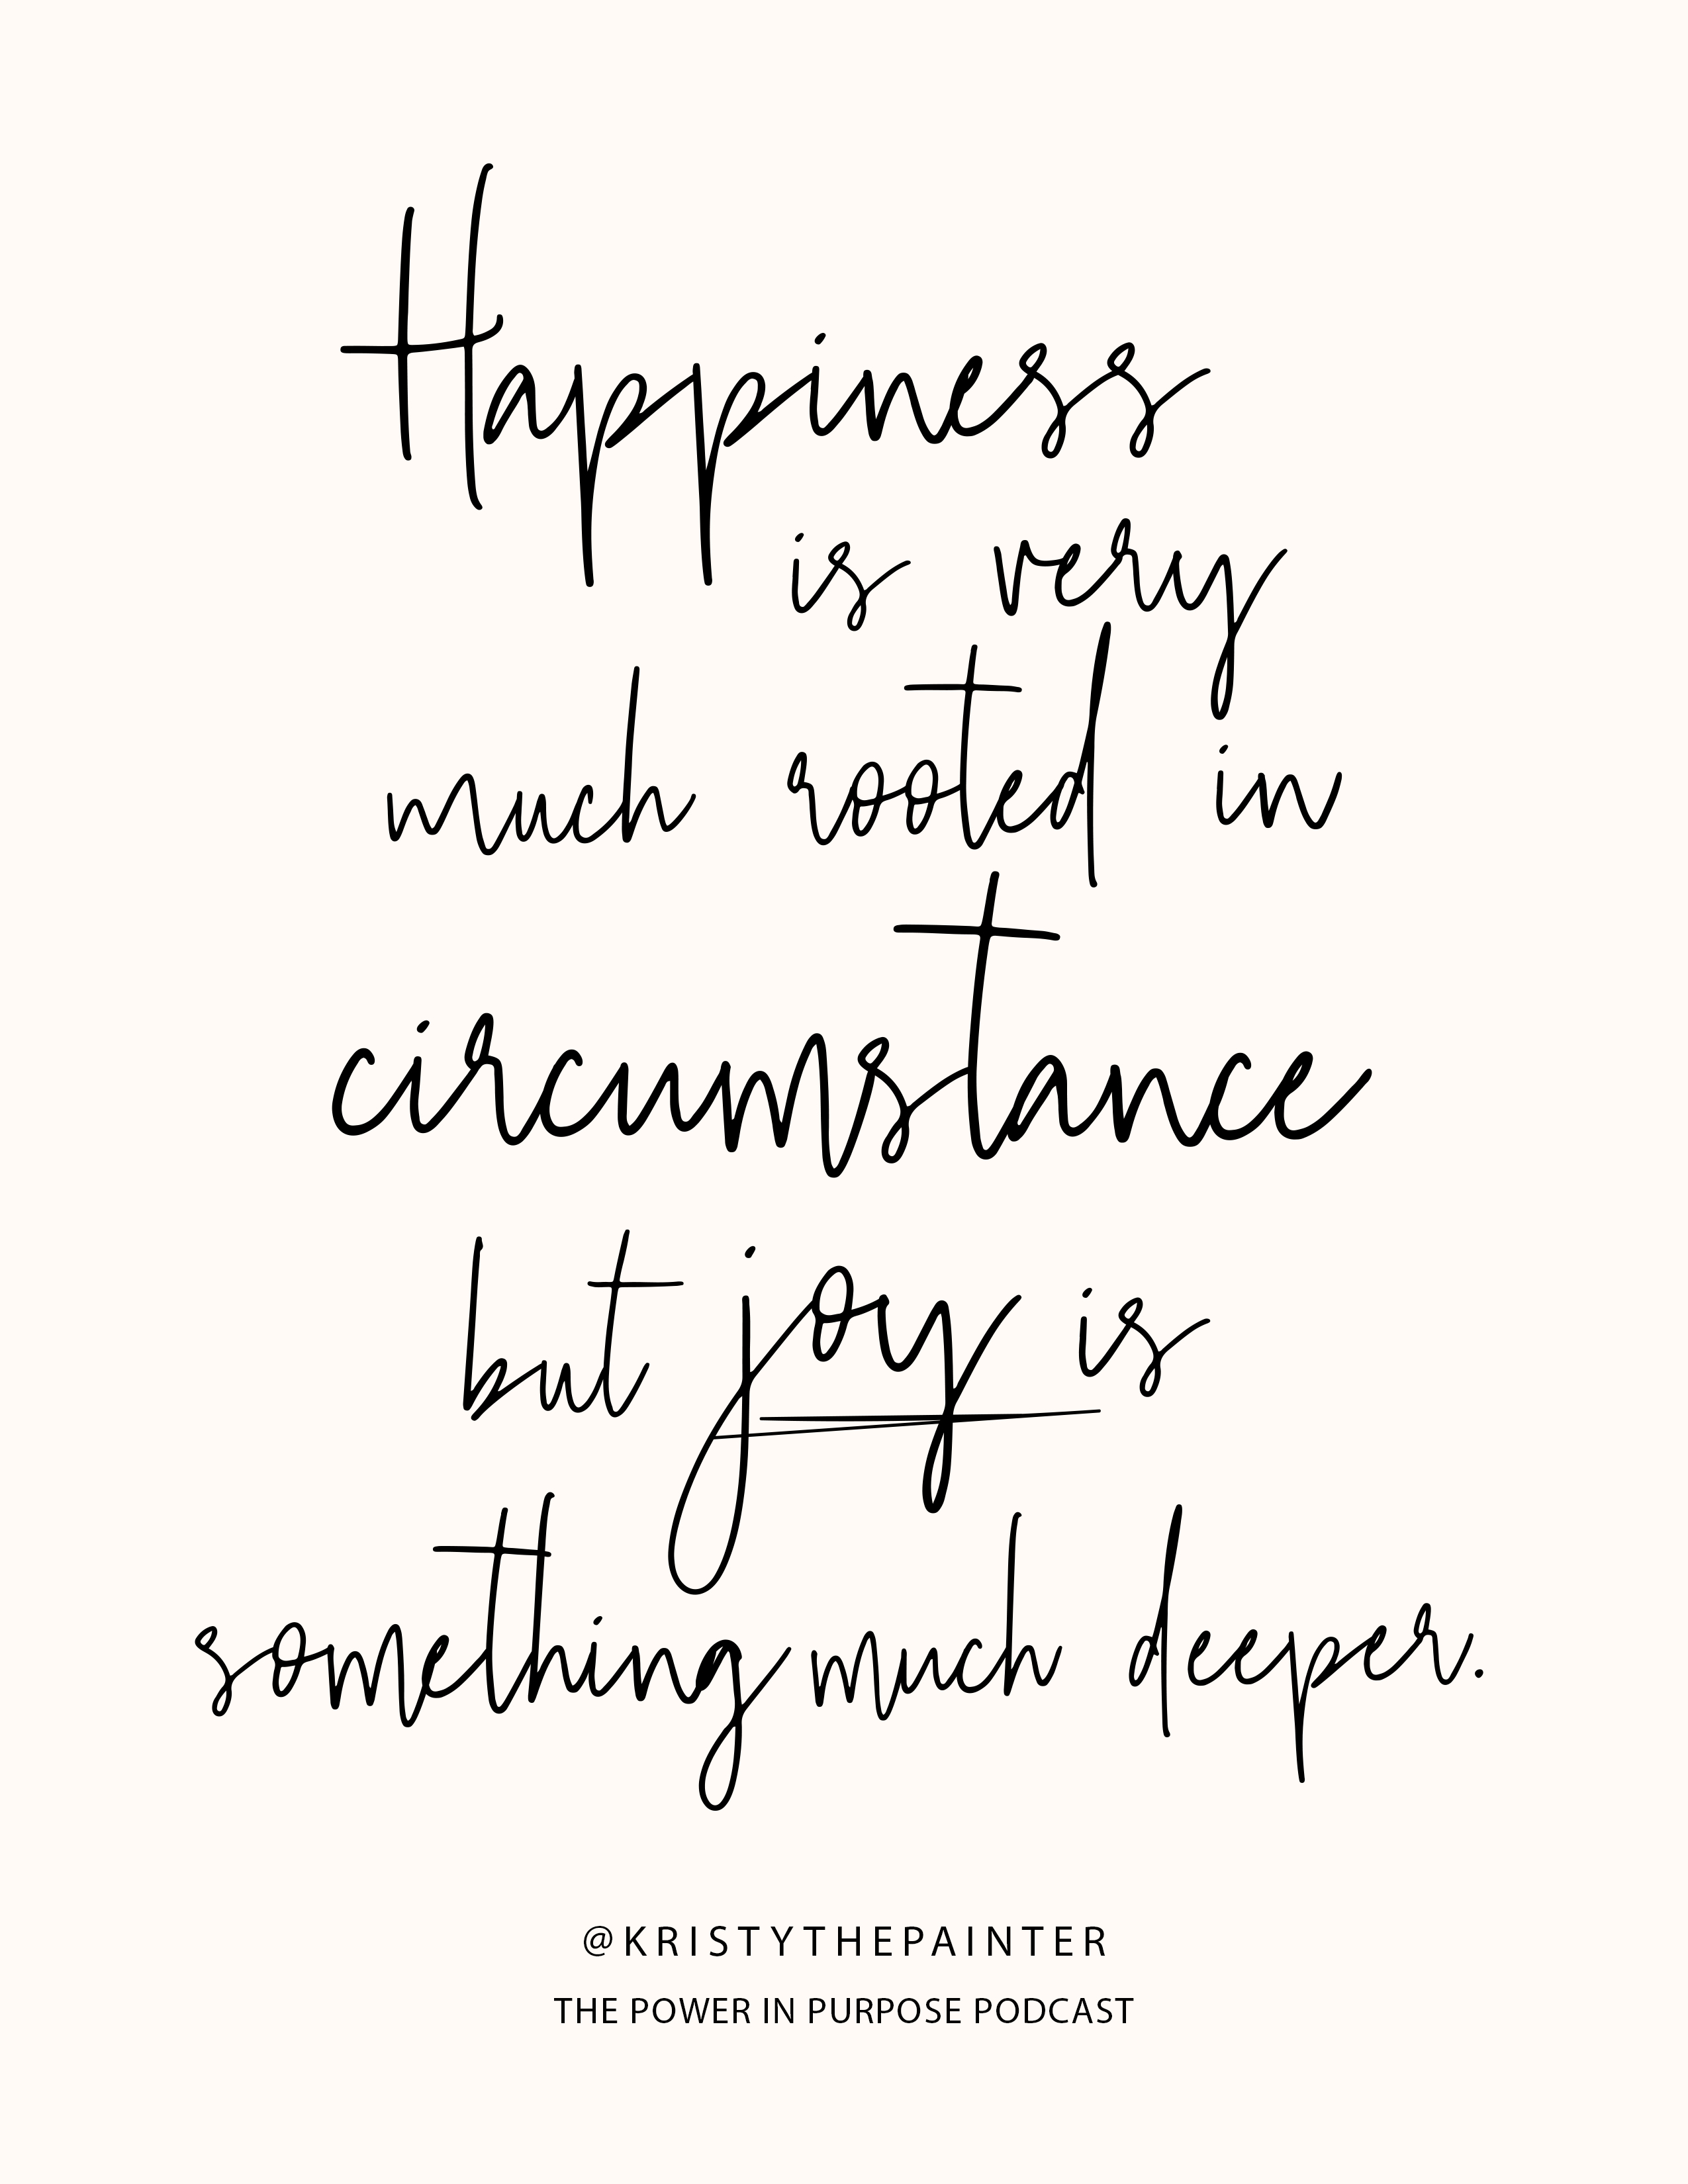 Happiness is very much rooted in circumstance, but joy is something much deeper. -- Kristy Rice, The Power in Purpose Podcast